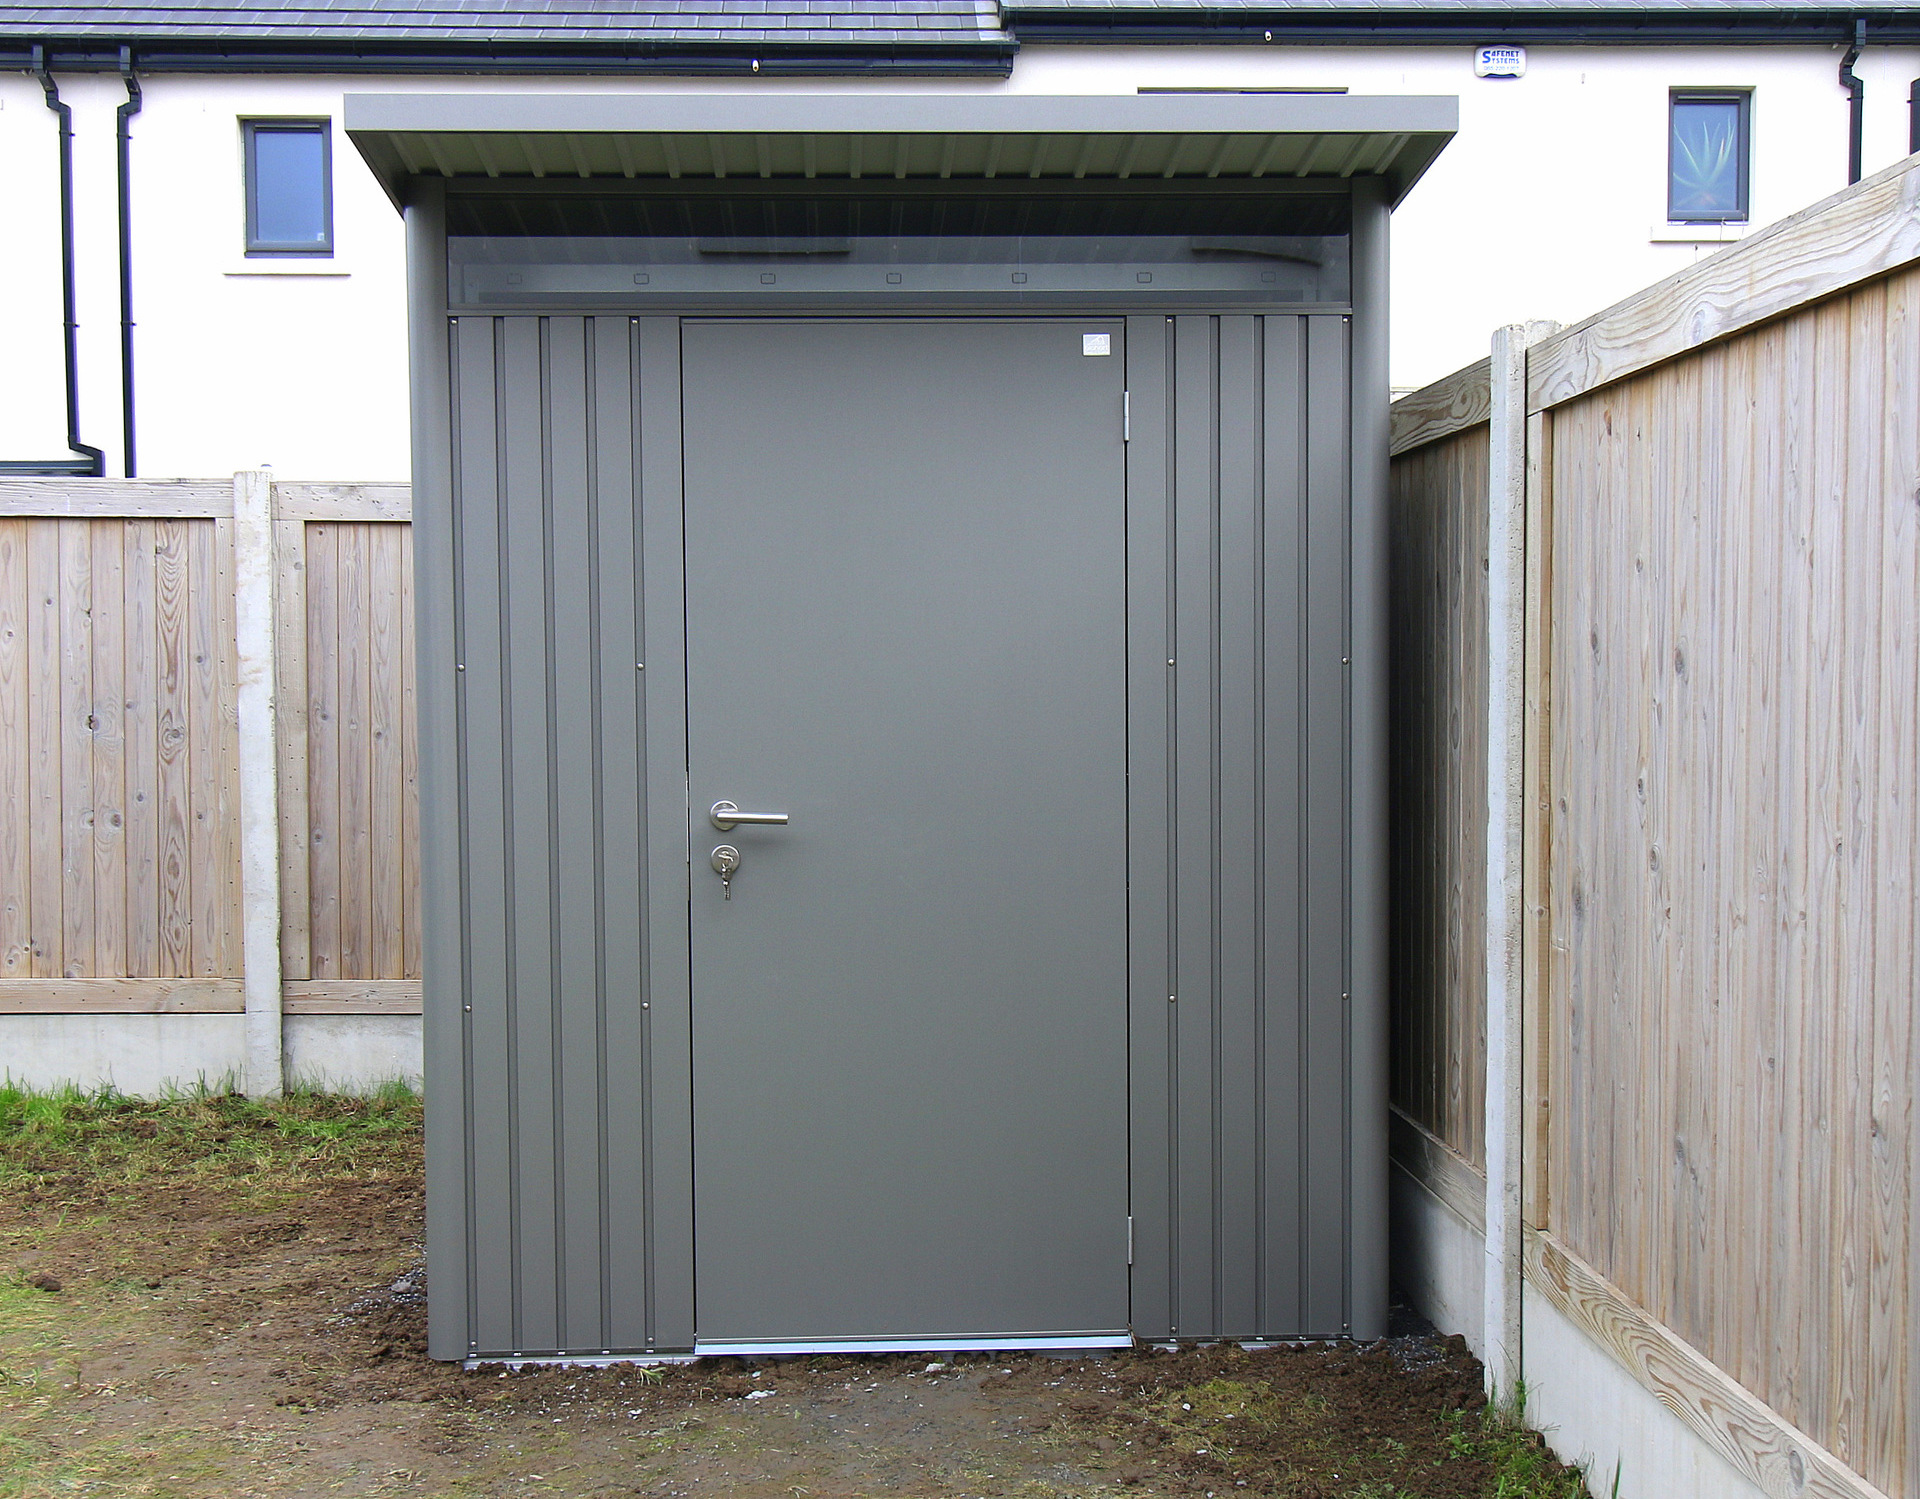 Biohort AvantGarde A2 in metallic quartz grey, supplied & fitted in Portmarnock   | Owen Chubb Ireland's Leading supplier of Biohort Garden Sheds & Storage Solutions | Supplied + Fitted Nationwide